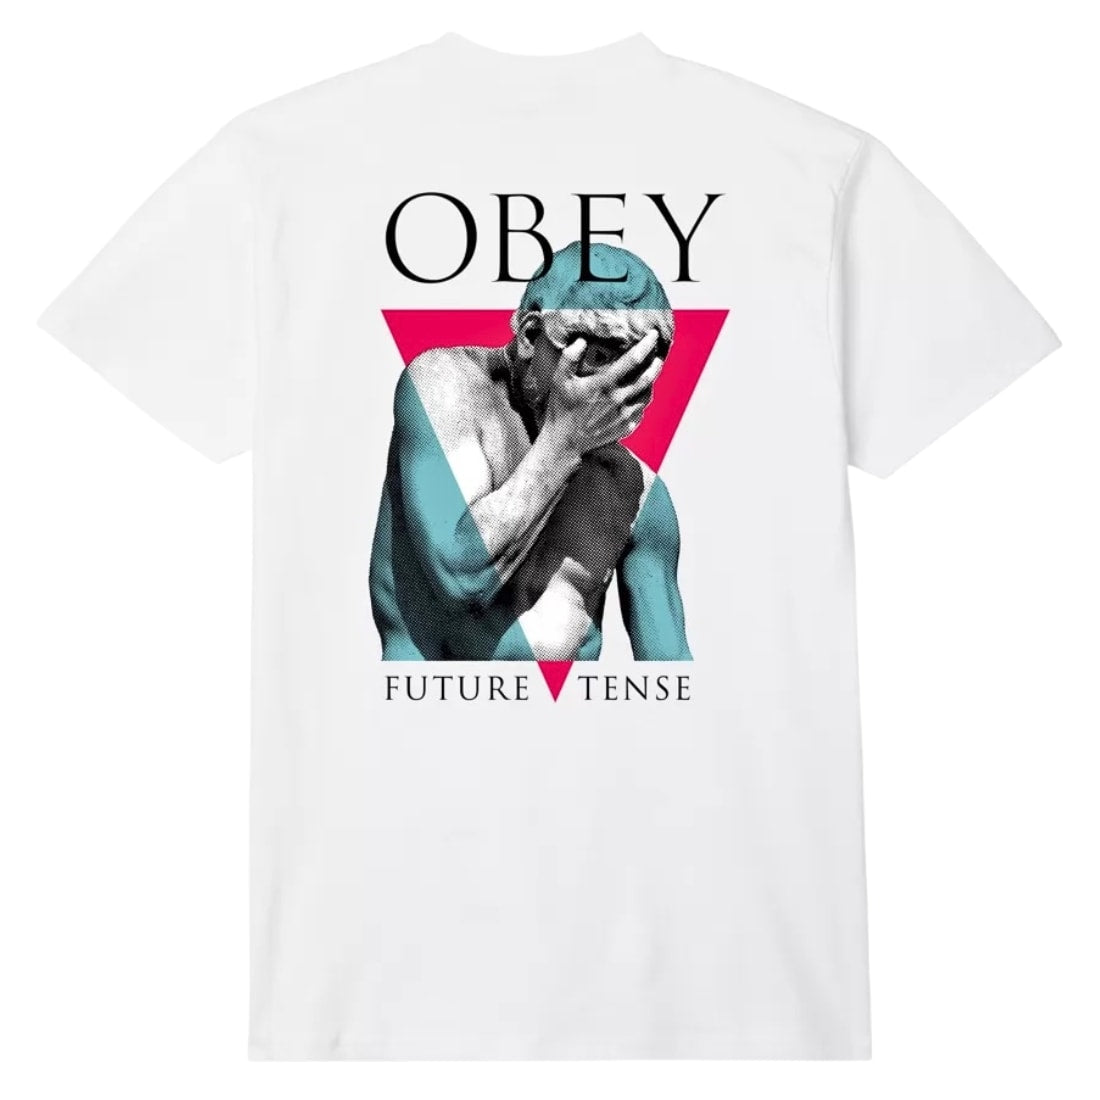 Obey Future Tense T-Shirt - White - Mens Graphic T-Shirt by Obey